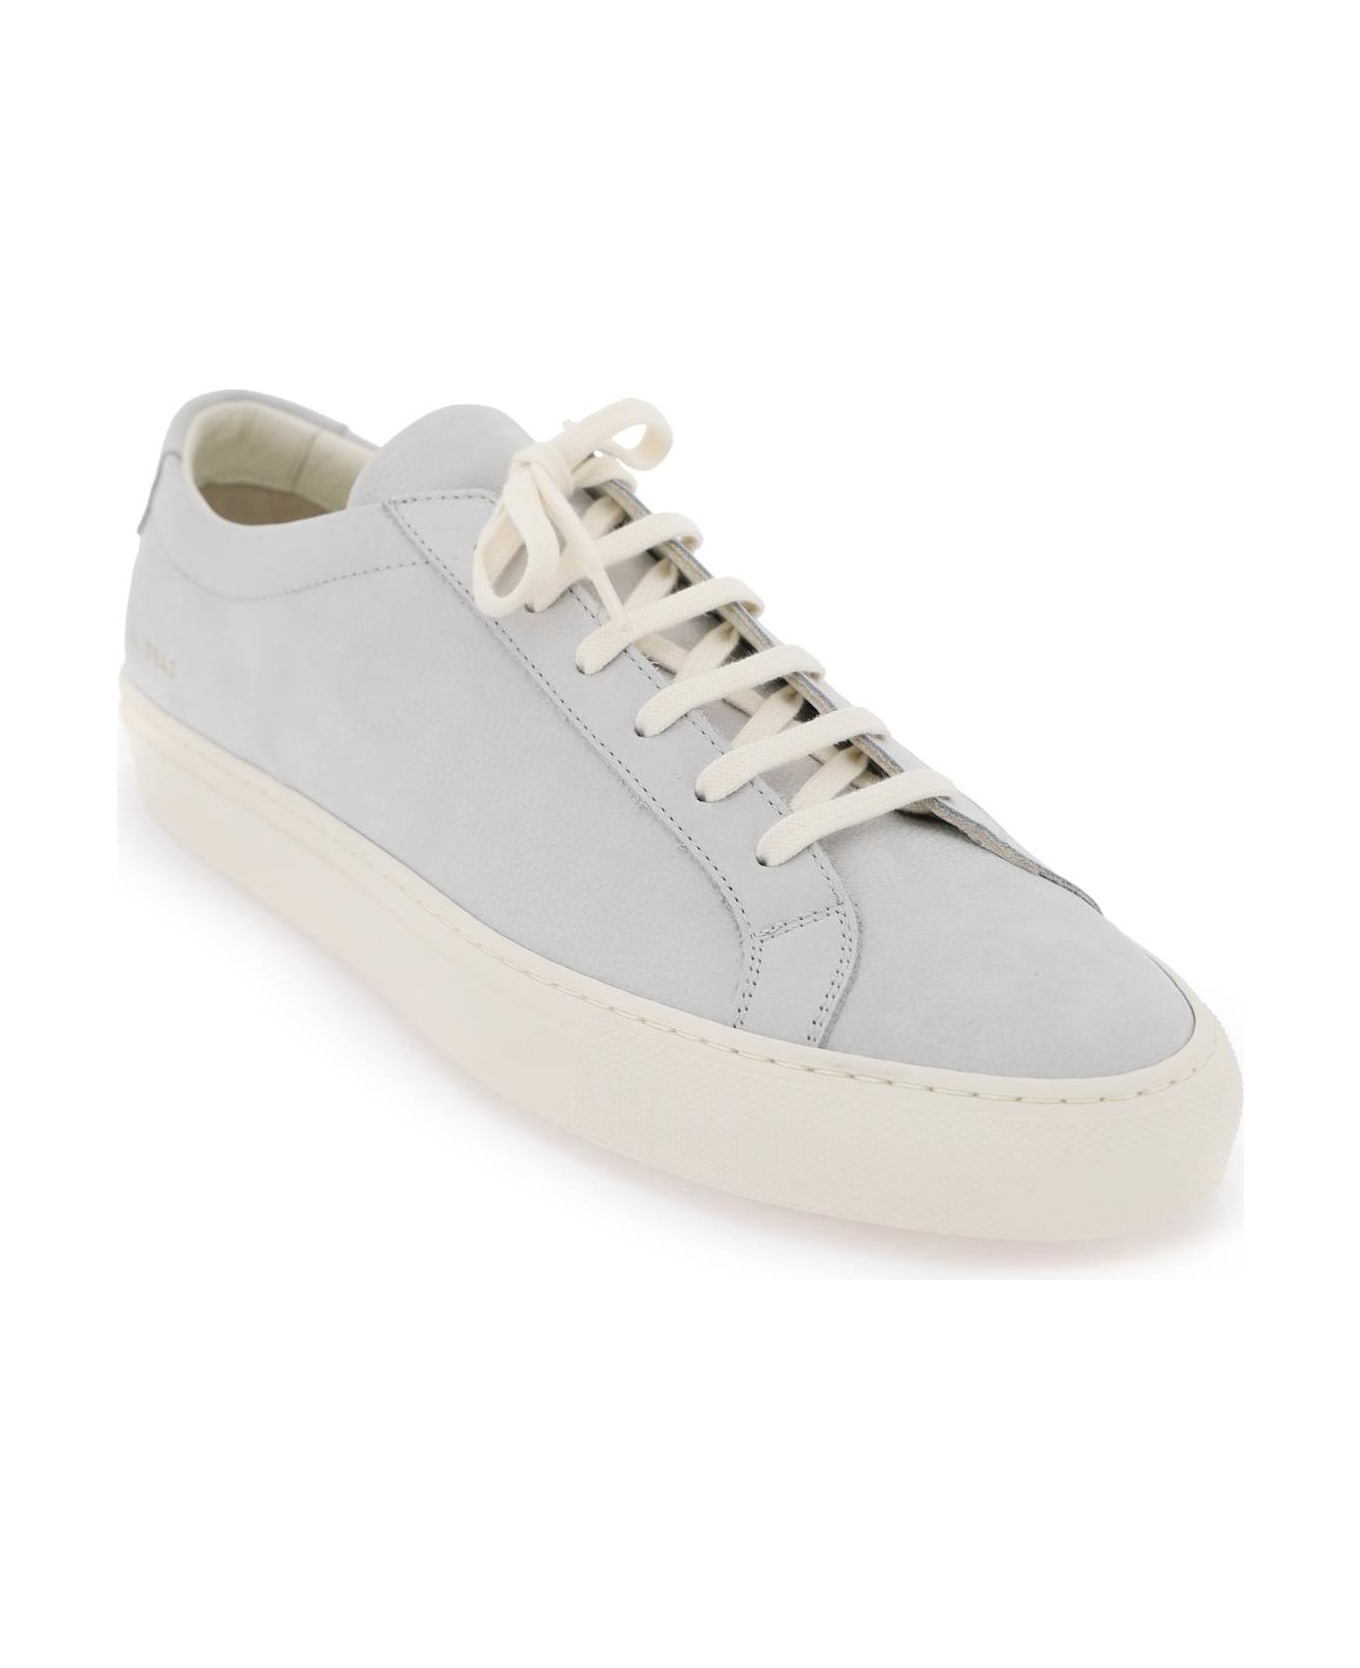 Common Projects Original Achilles Sneakers - GREY (Grey) スニーカー